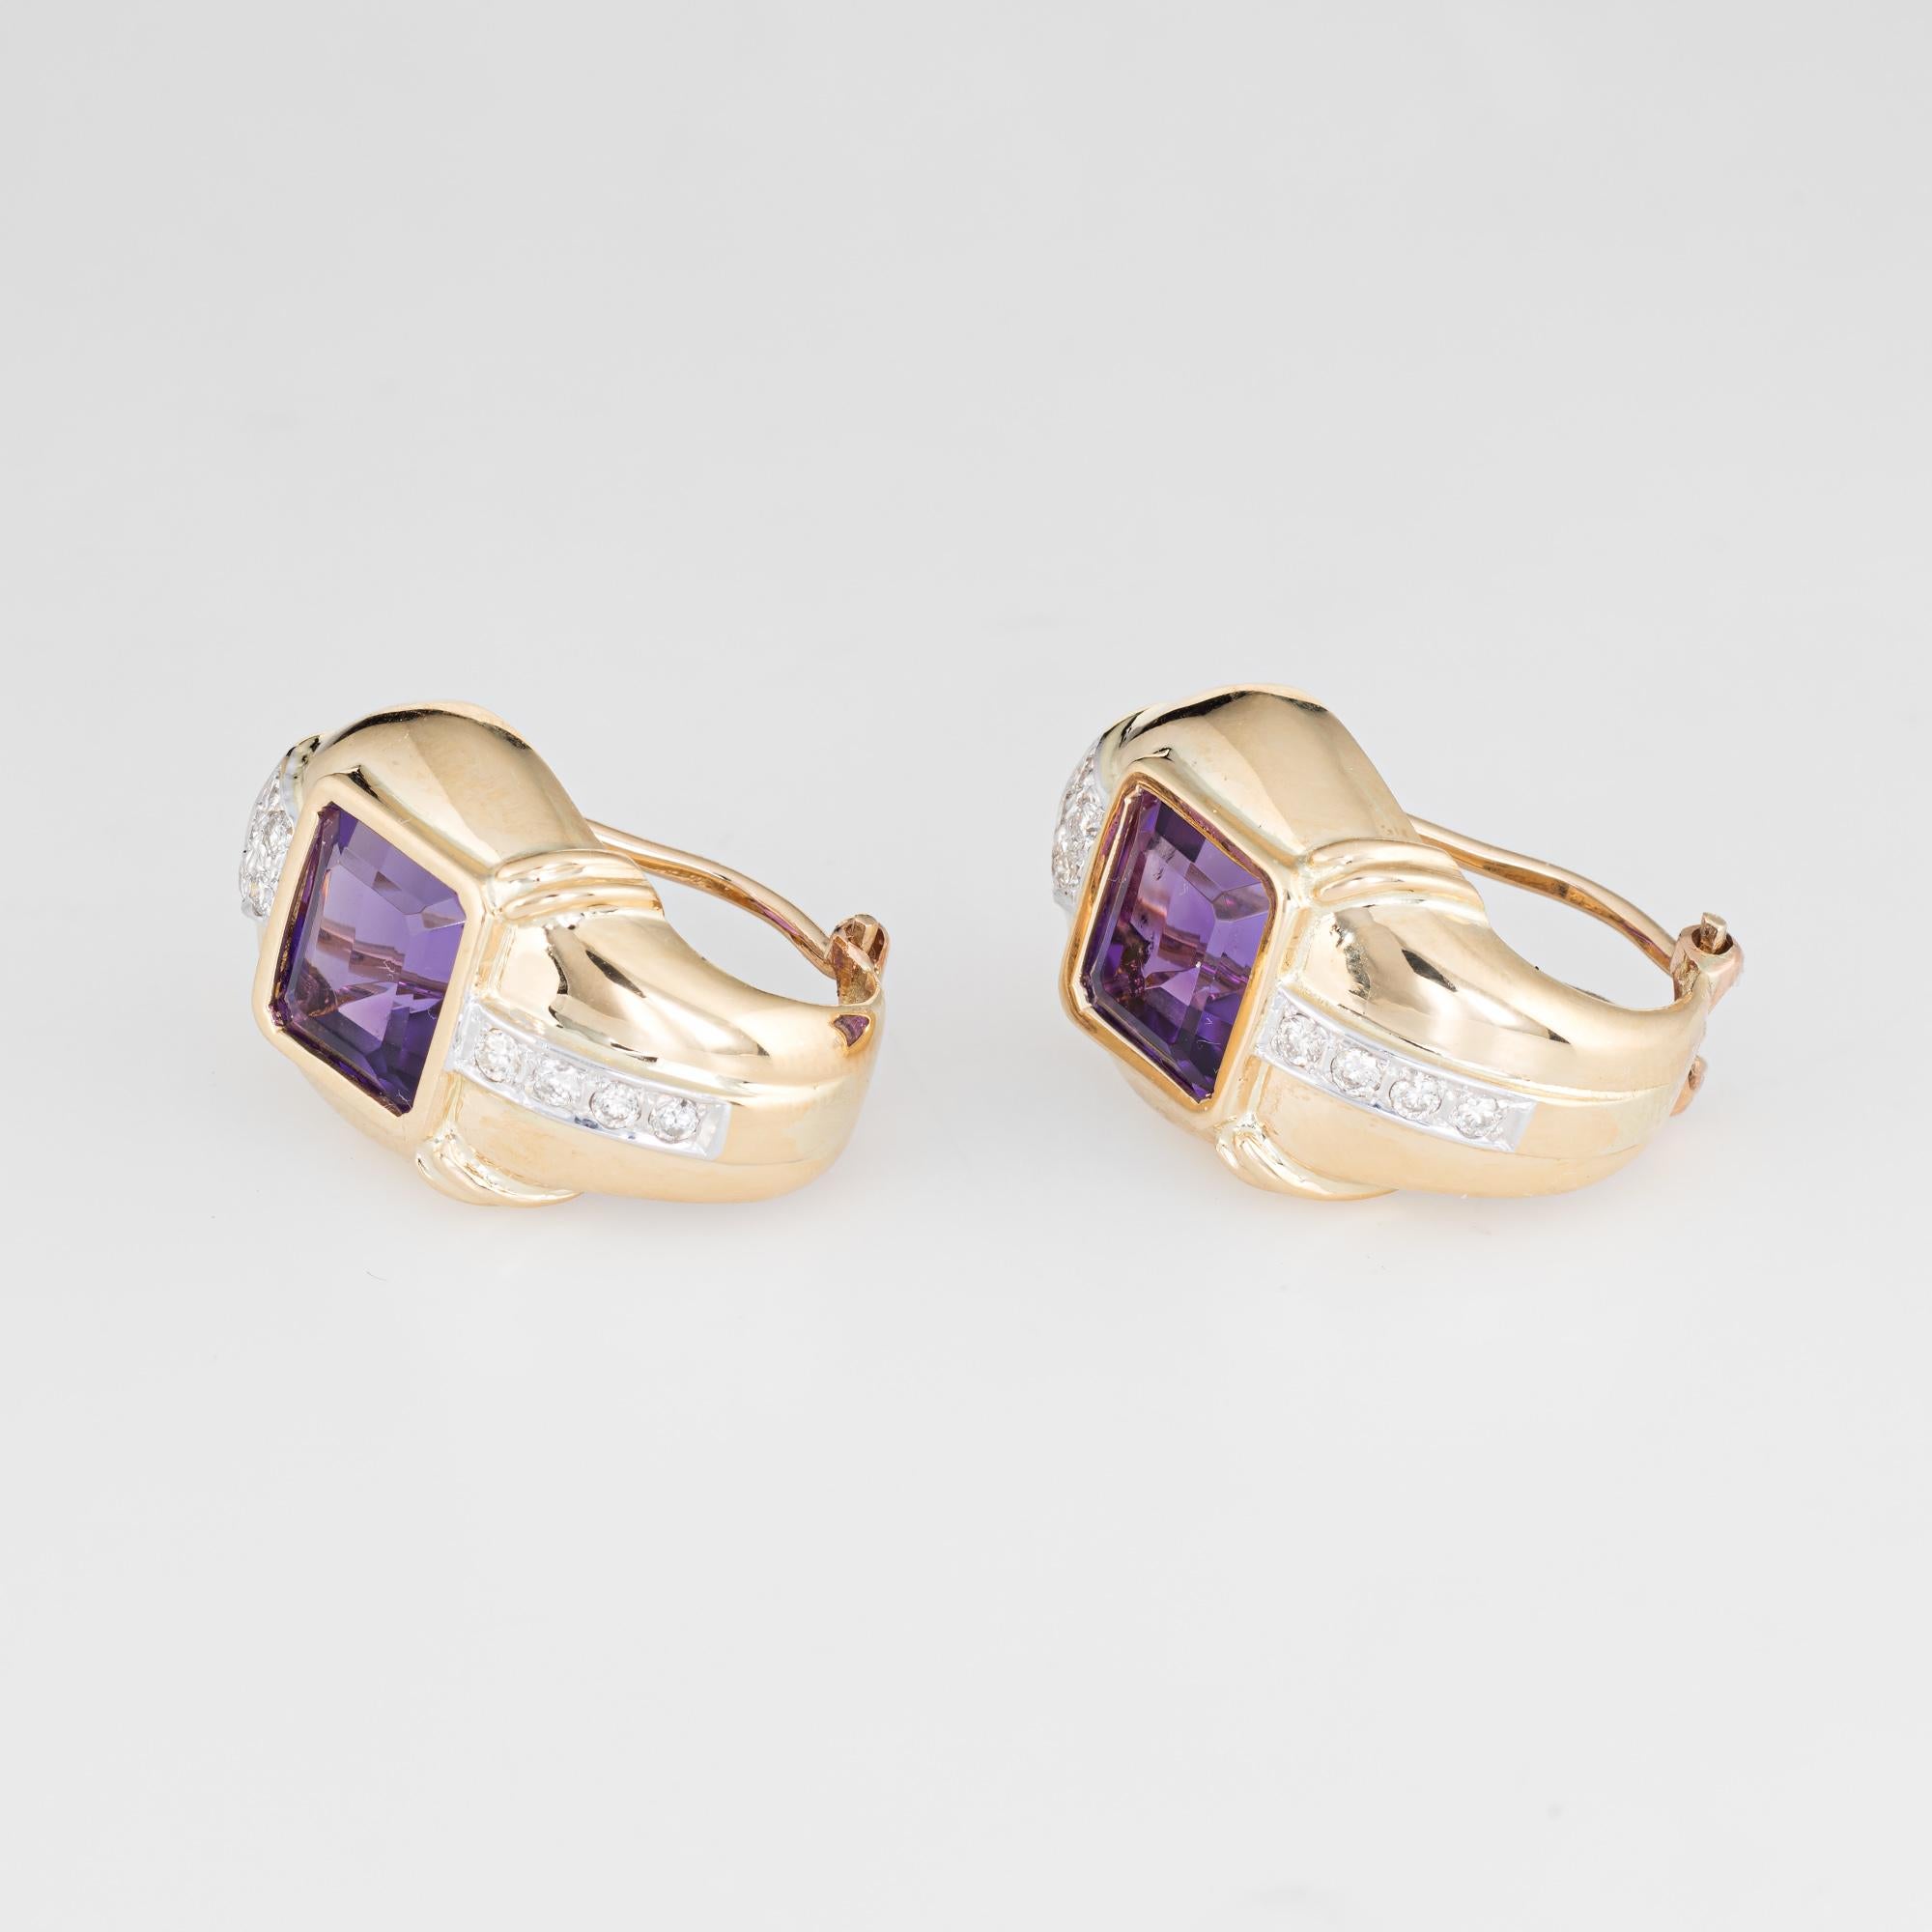 Stylish pair of vintage amethyst & diamond earrings (circa 1980s) crafted in 18k yellow gold. 

Amethysts each measure 8mm (estimated at 8 carats each - 16 carats total estimated weight). 18 estimated 0.01 carat round brilliant cut diamonds total an